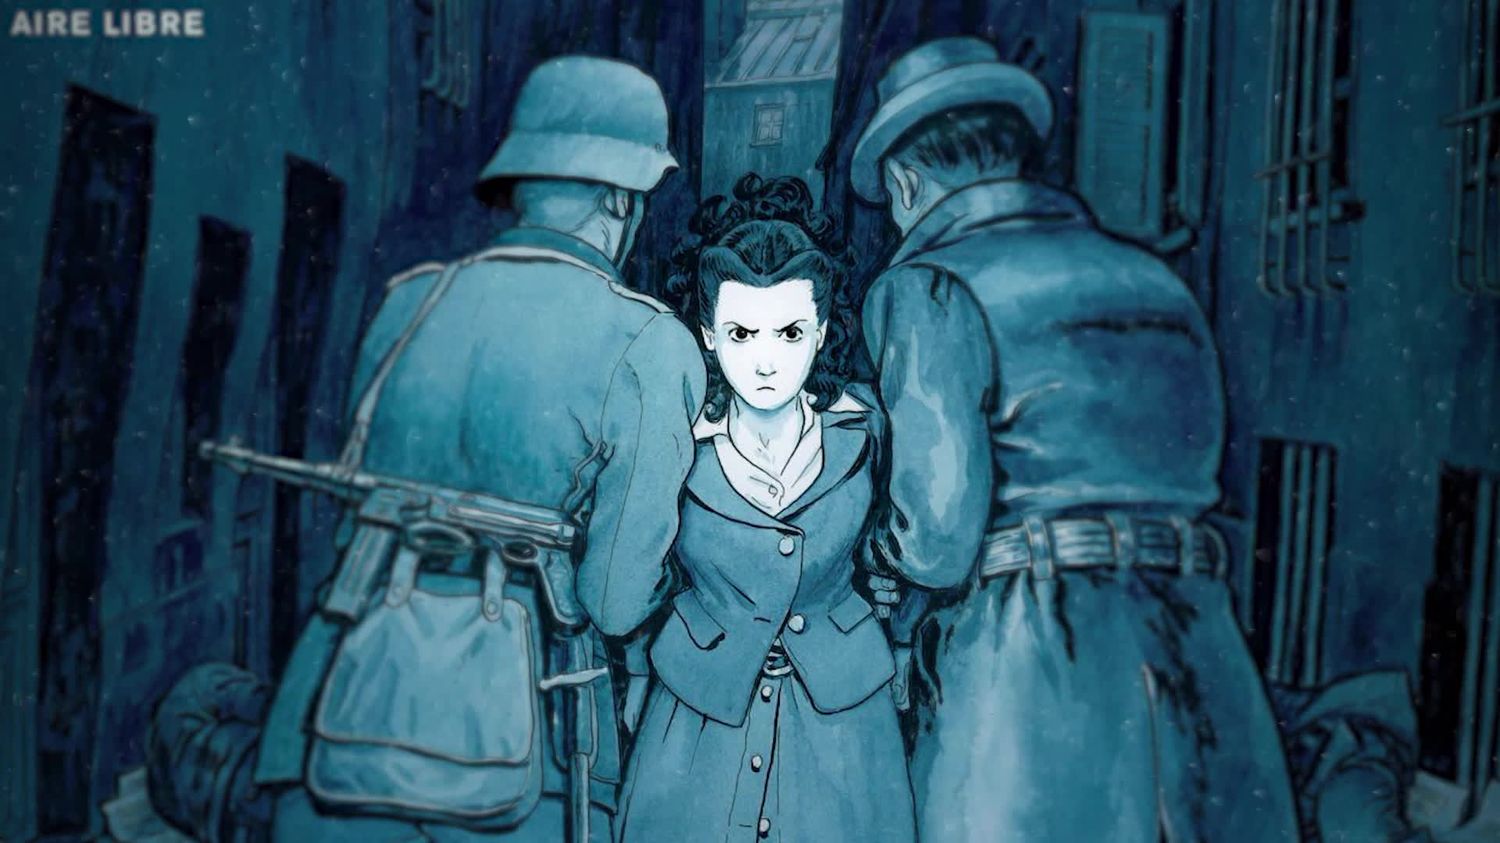 In Limoges, an exhibition based on a comic tells the story and involvement of the great French resistance fighter Madeleine Riffaud